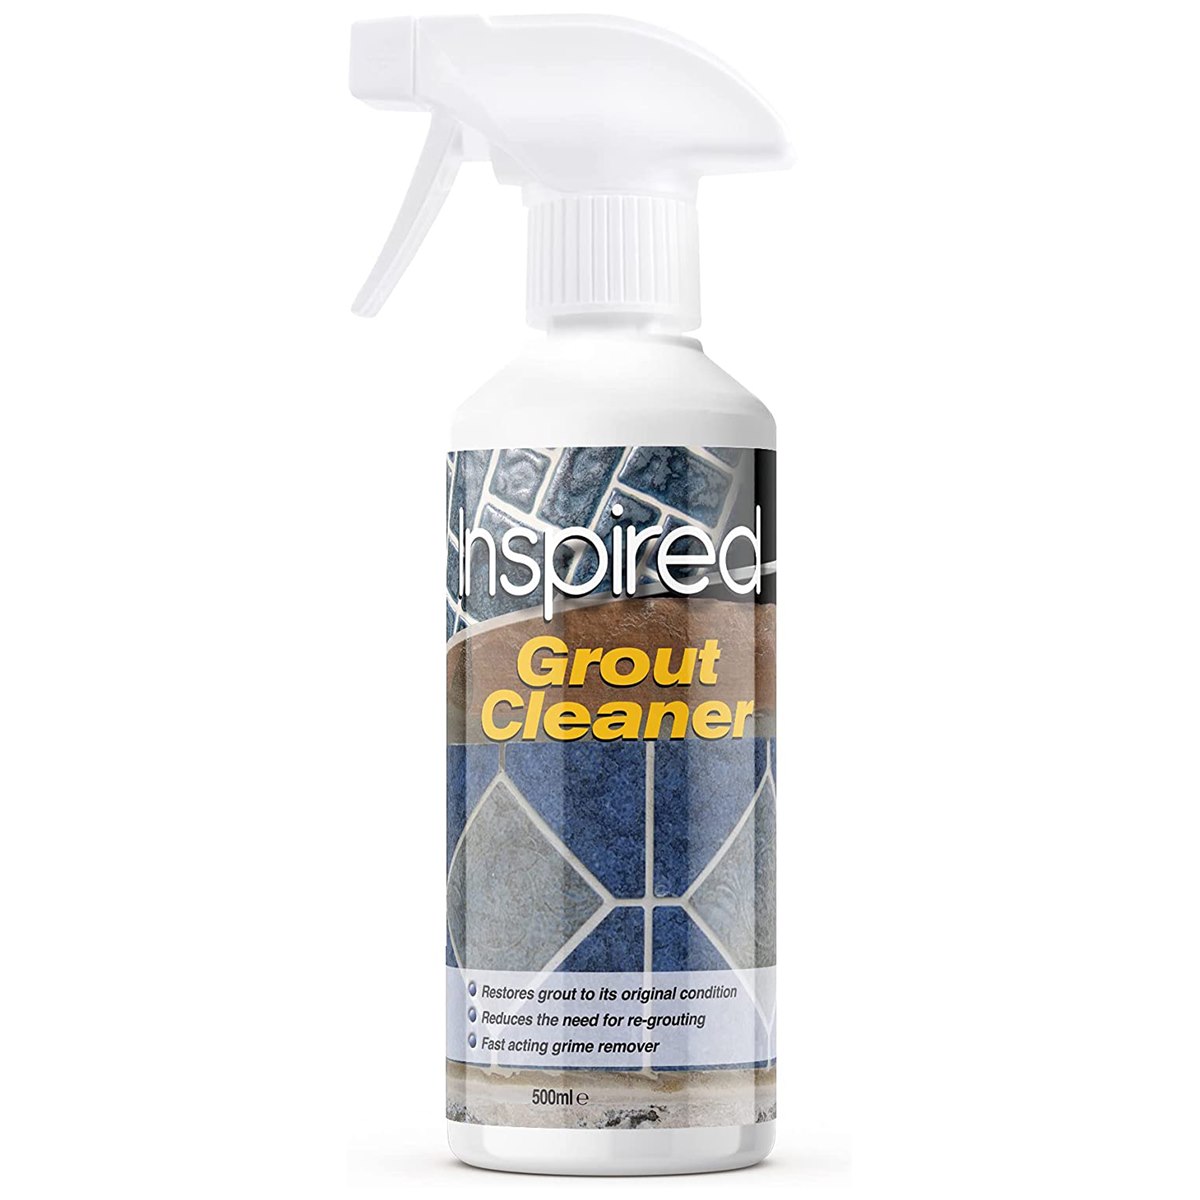 Inspired Grout Cleaner Spray 500ml